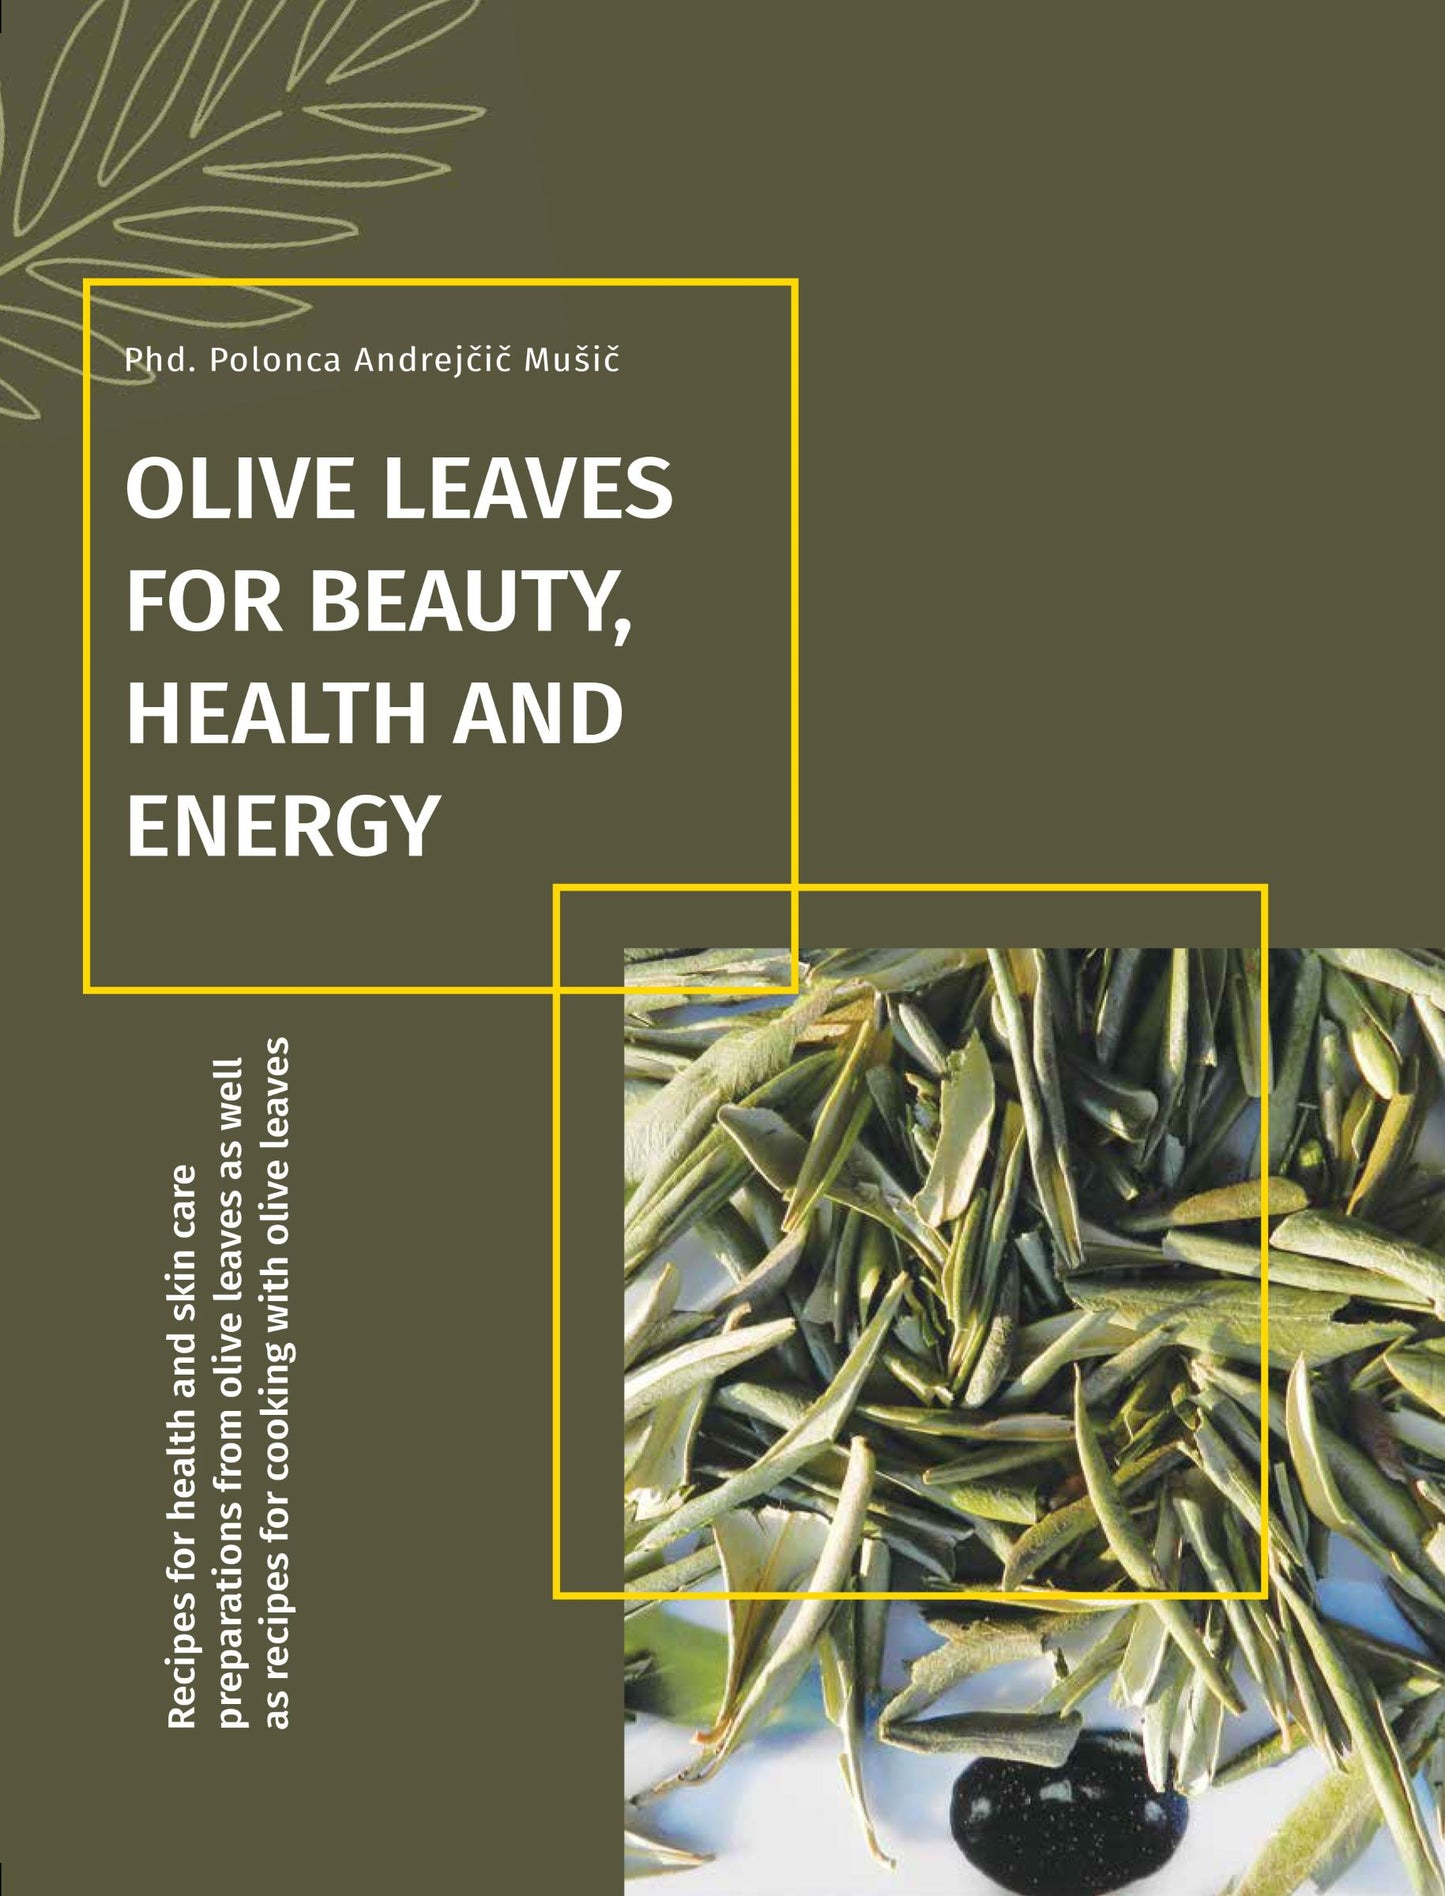 Olive leaves for beauty, health and energy